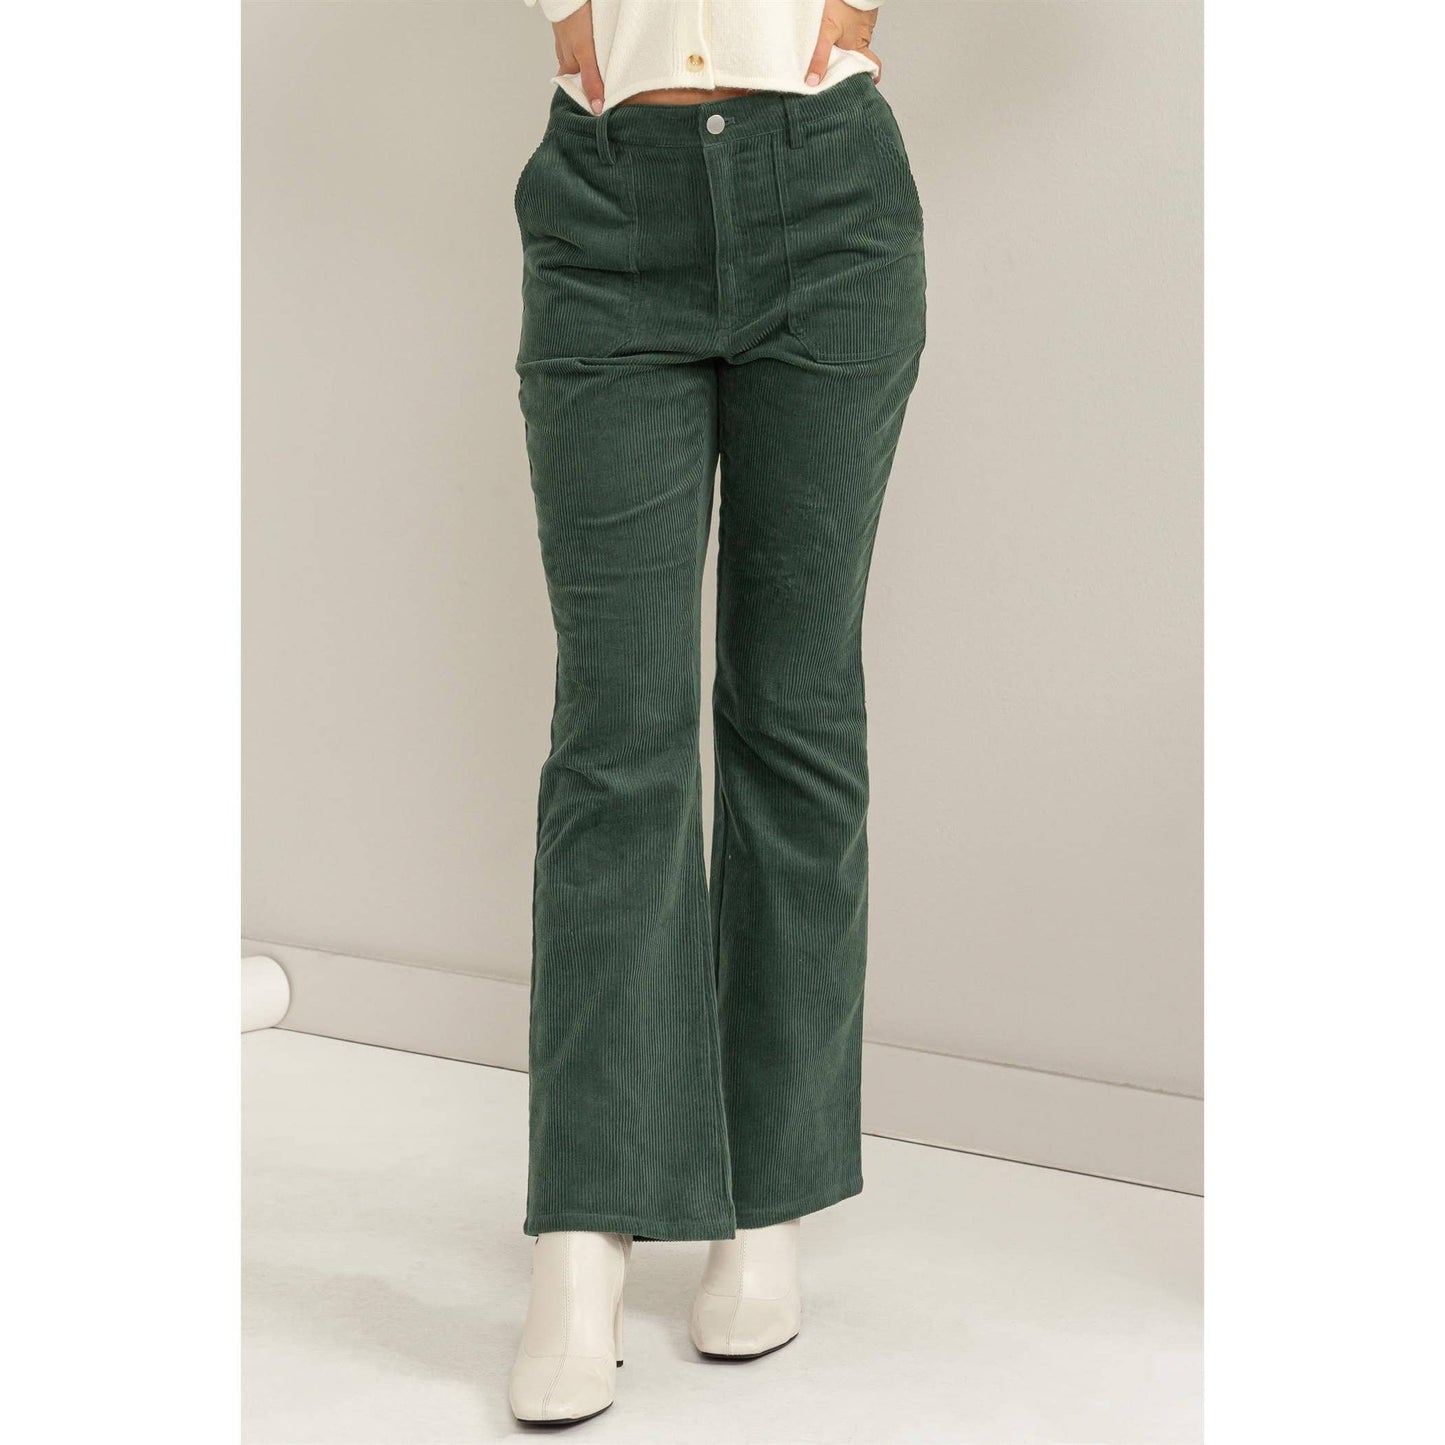 Corduroy Flare Pants in Gray/Green